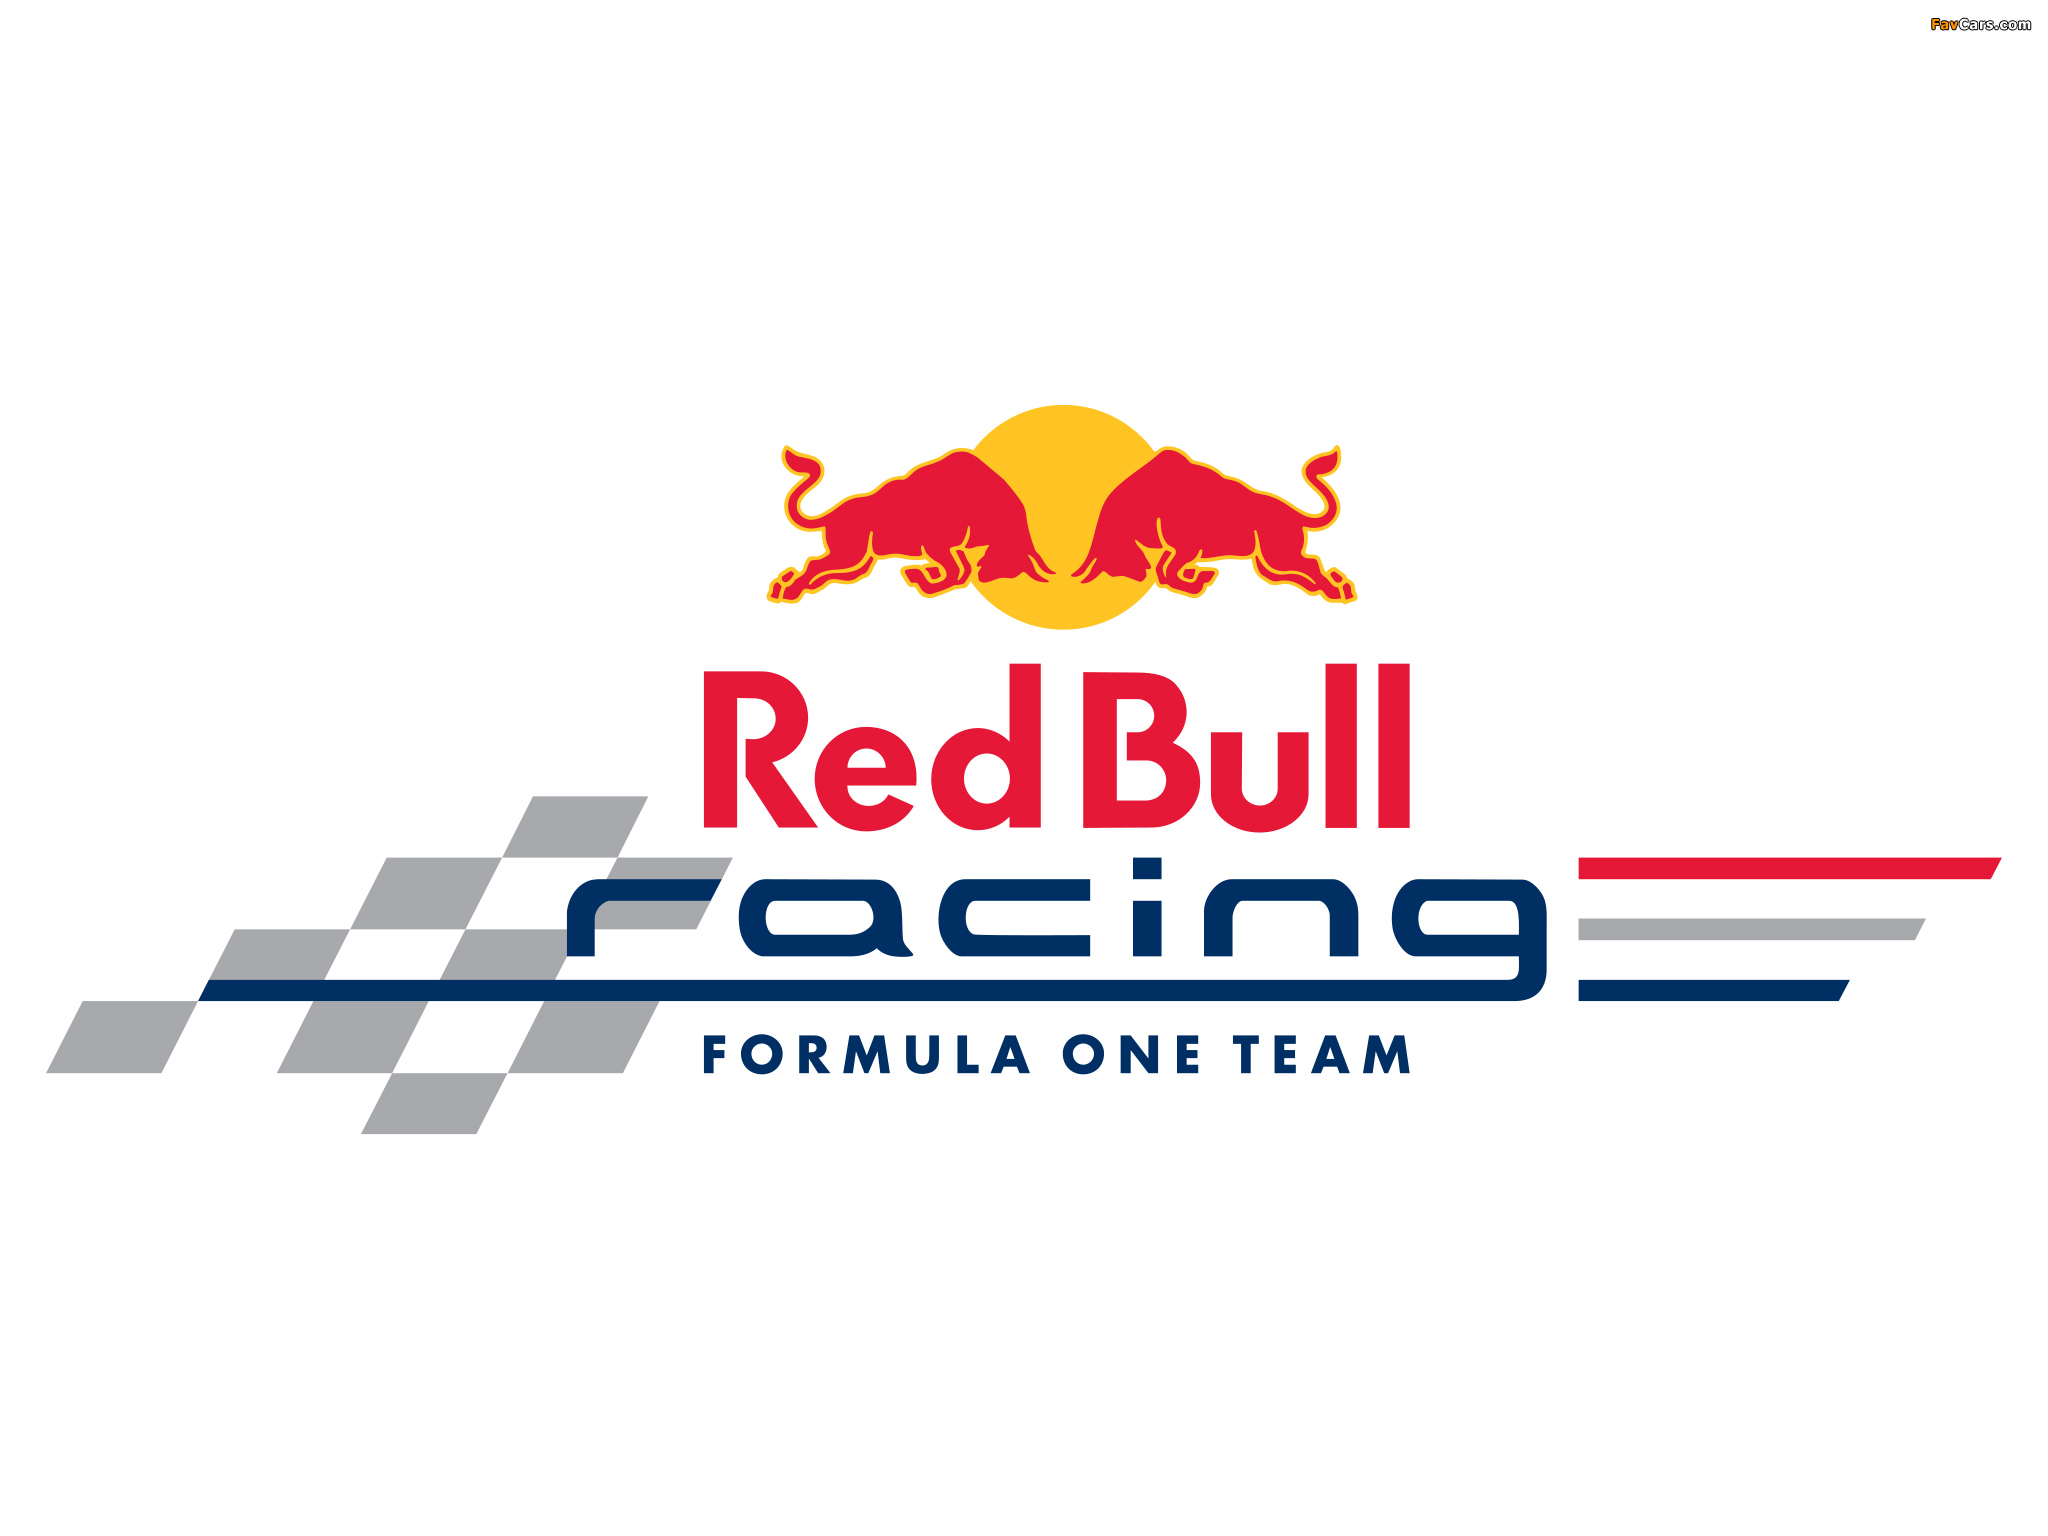 Red Bull images (2048 x 1536)